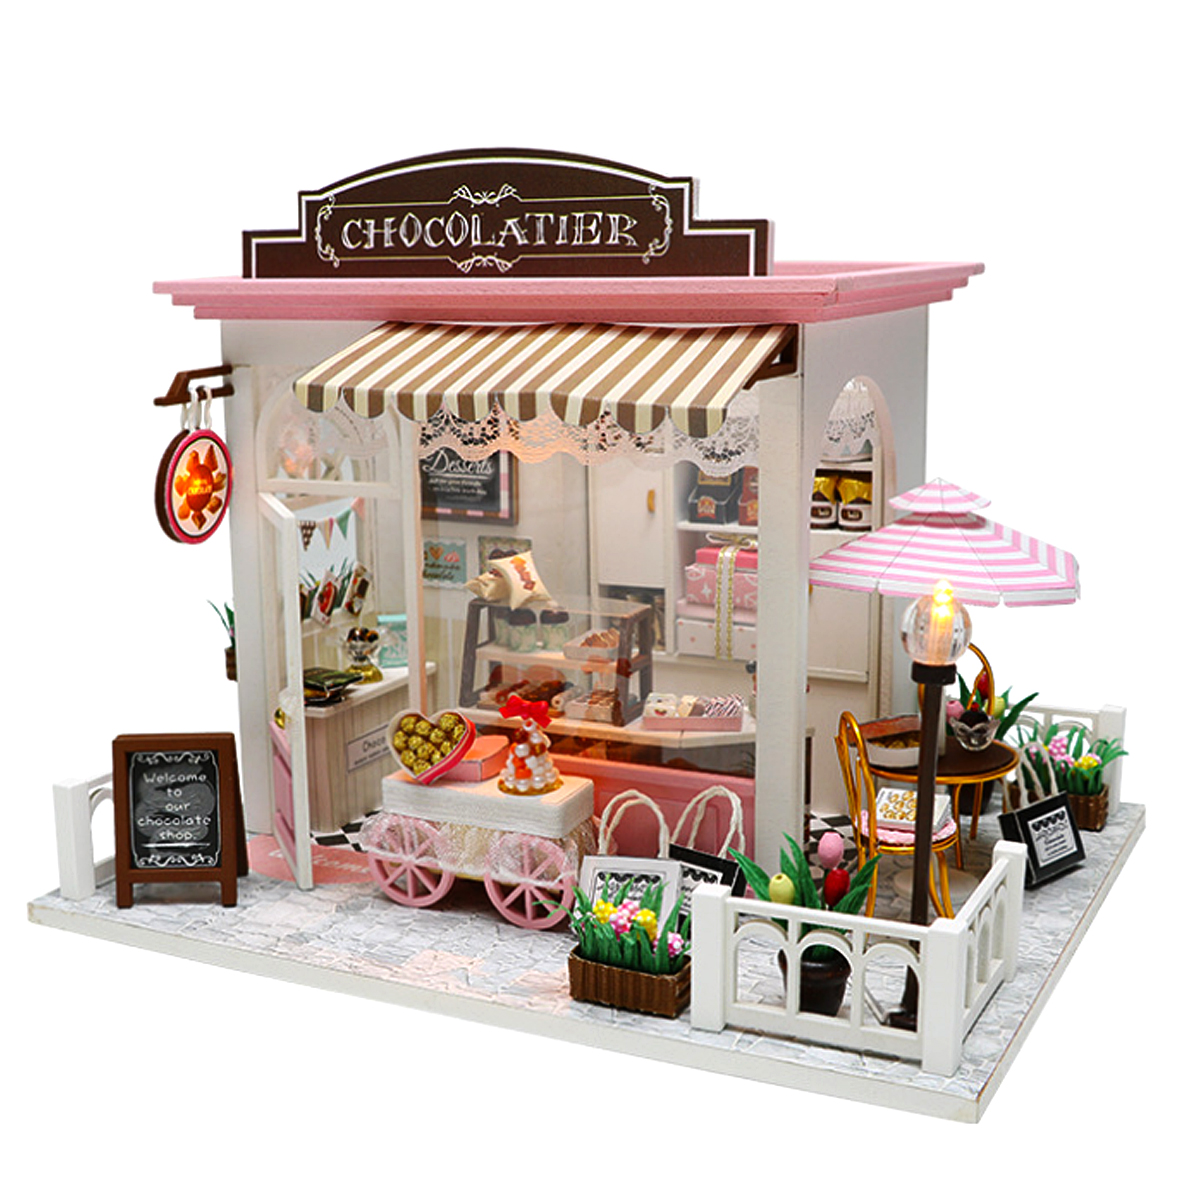 LED-Wood-DIY-Cocoas-Whimsy-Assemble-Doll-House-with-Sound-Light-Model-Toy-1408496-4